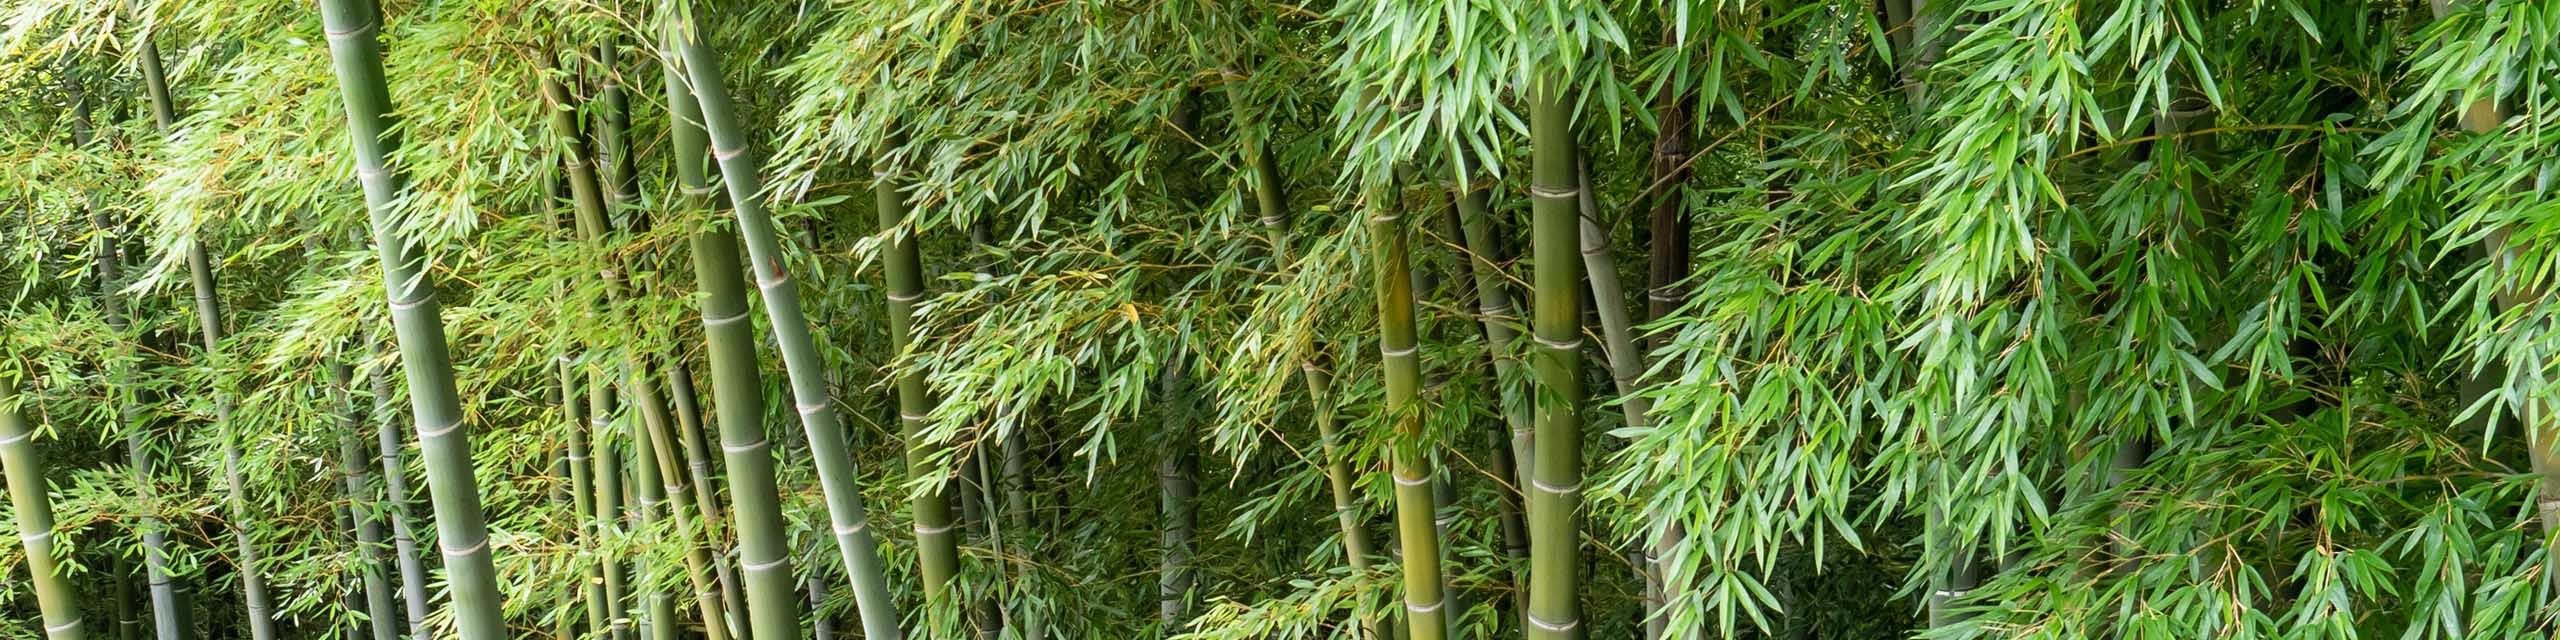 A grove of green bamboo plants.